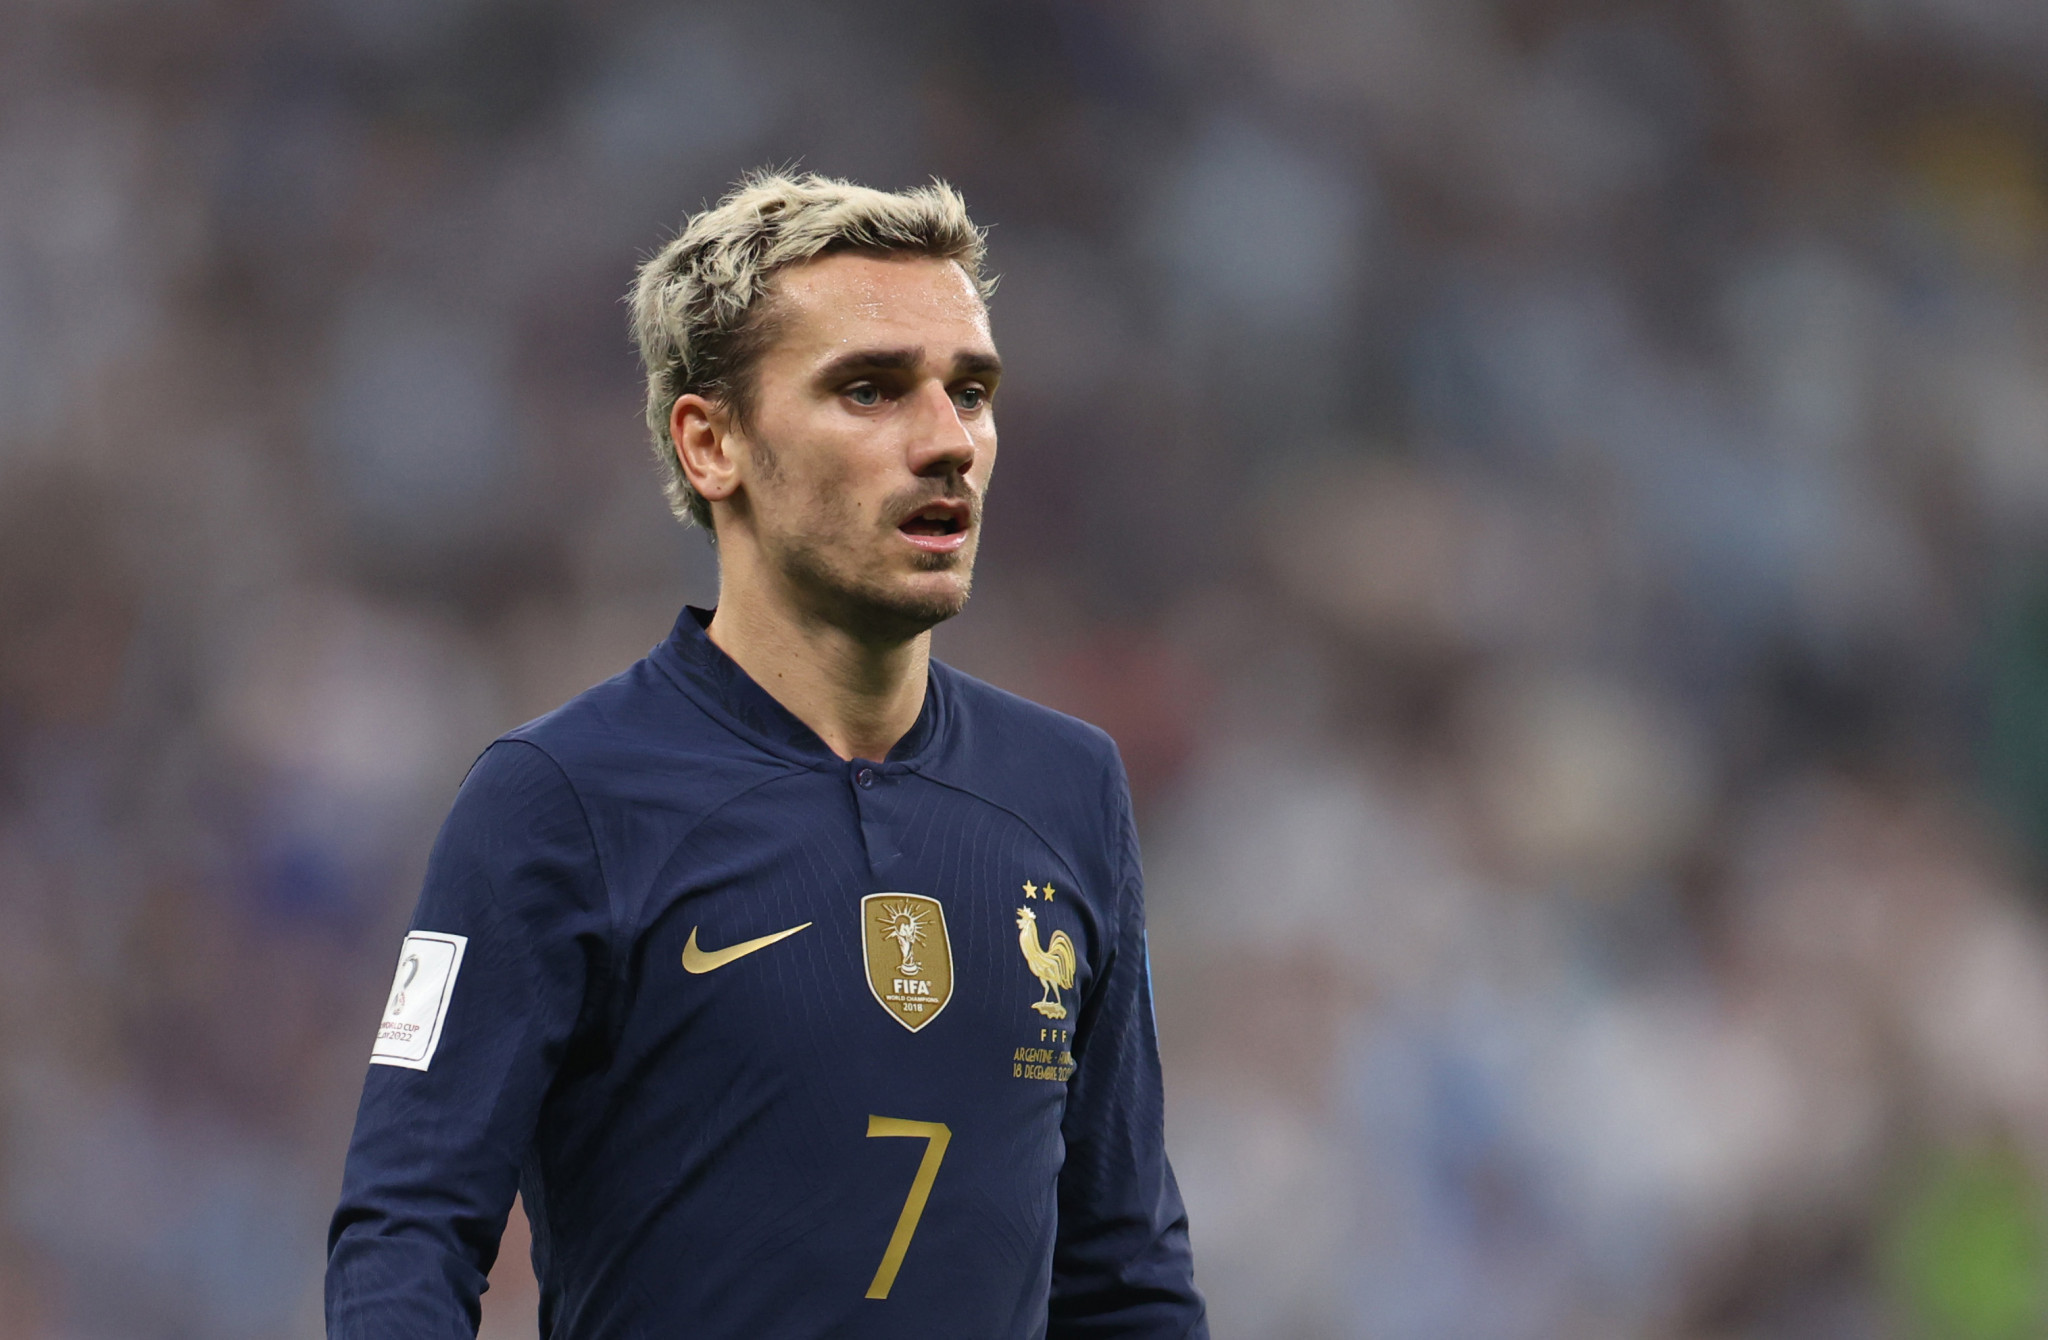 Griezmann claims will exert "extraordinary pressure" to be allowed to play at Paris 2024